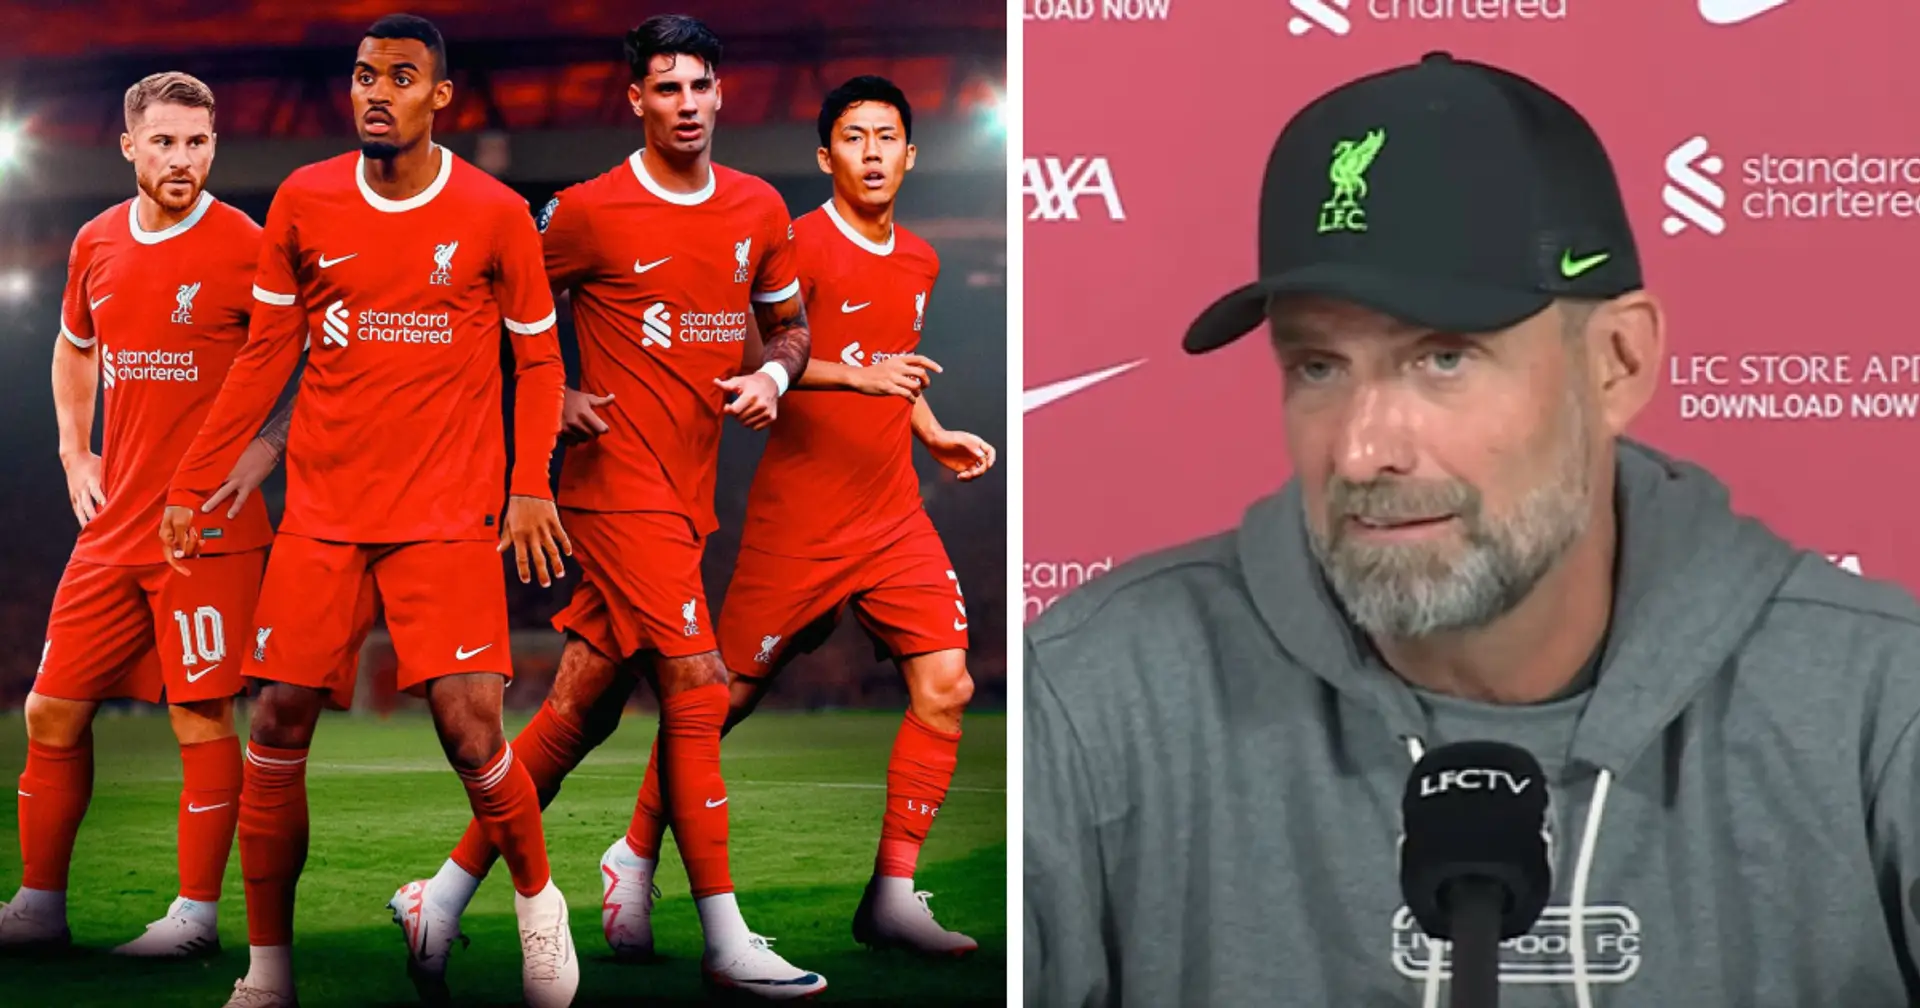 Liverpool were hours away from signing Man Utd midfielder, Klopp rejected him for another player